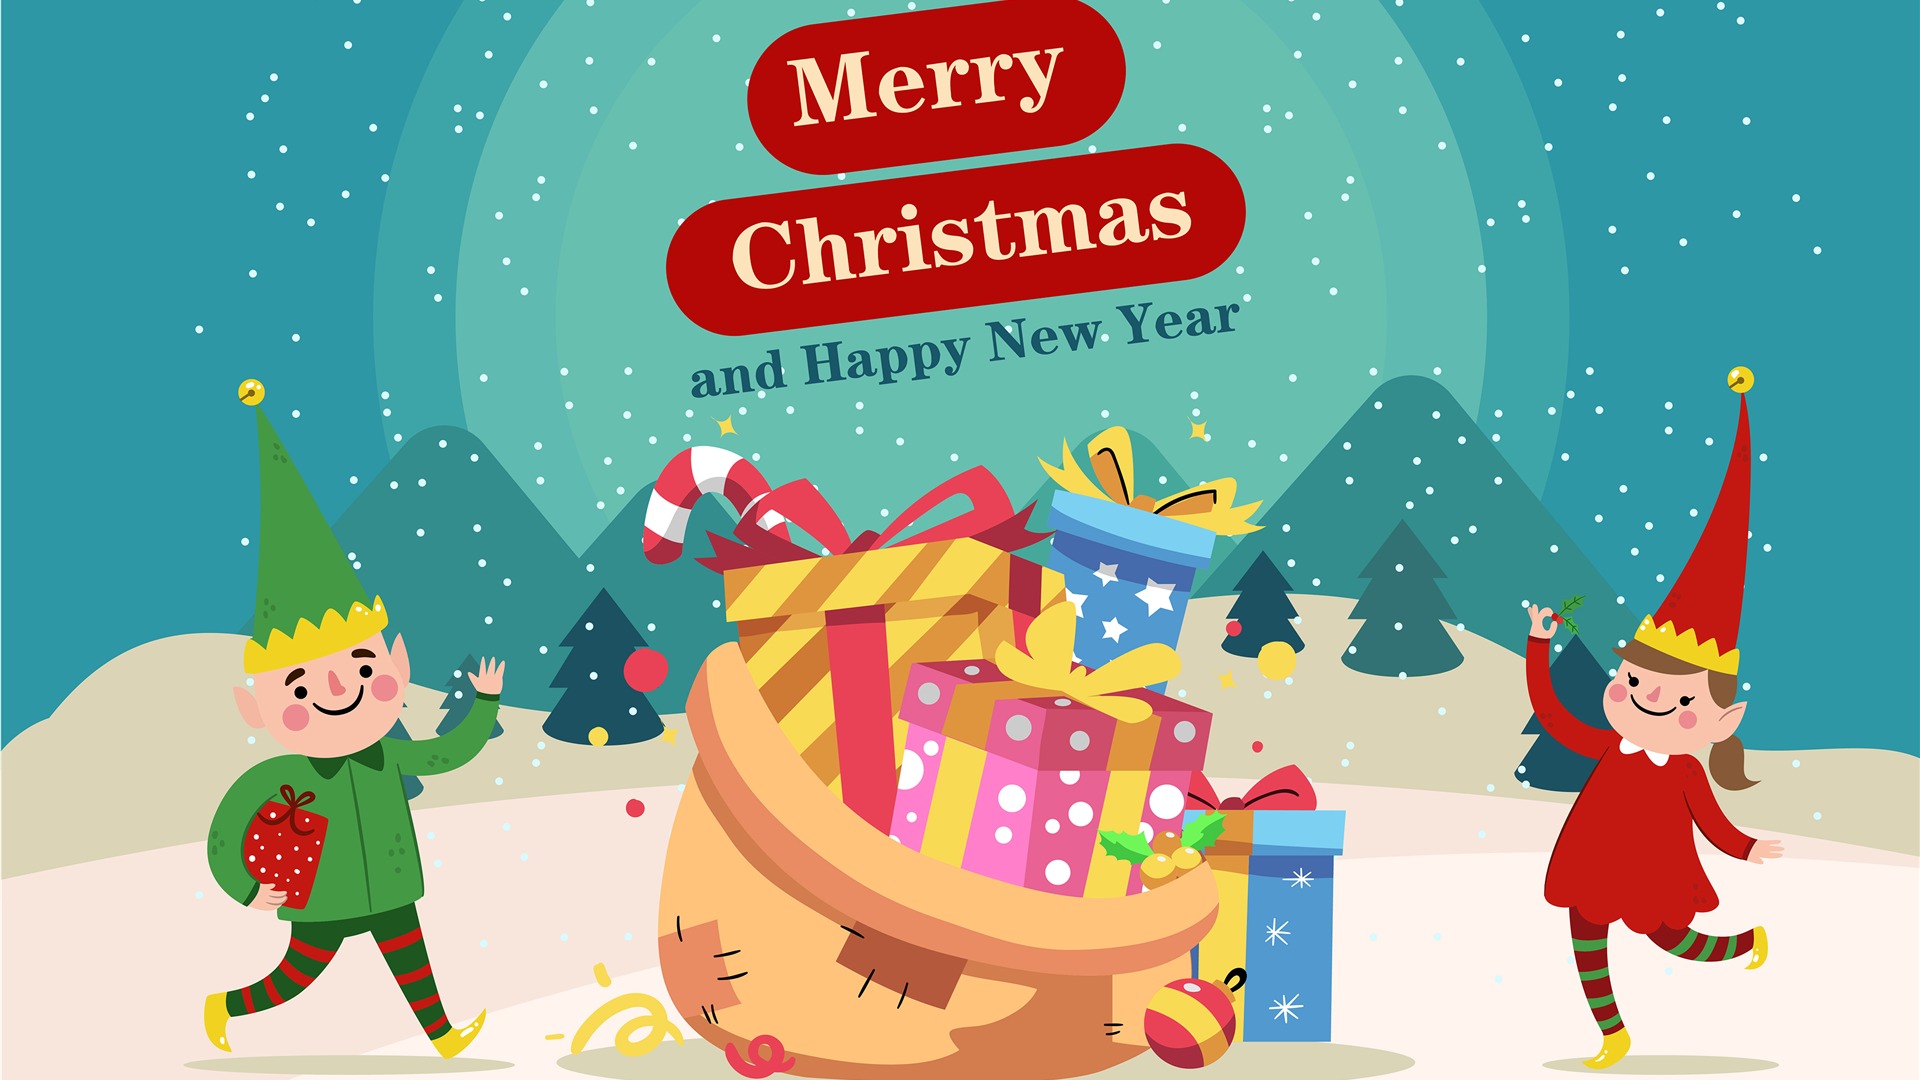 Happy New Year Merry Christmas Holiday Gift Wallpaper - Christmas Day - HD Wallpaper 